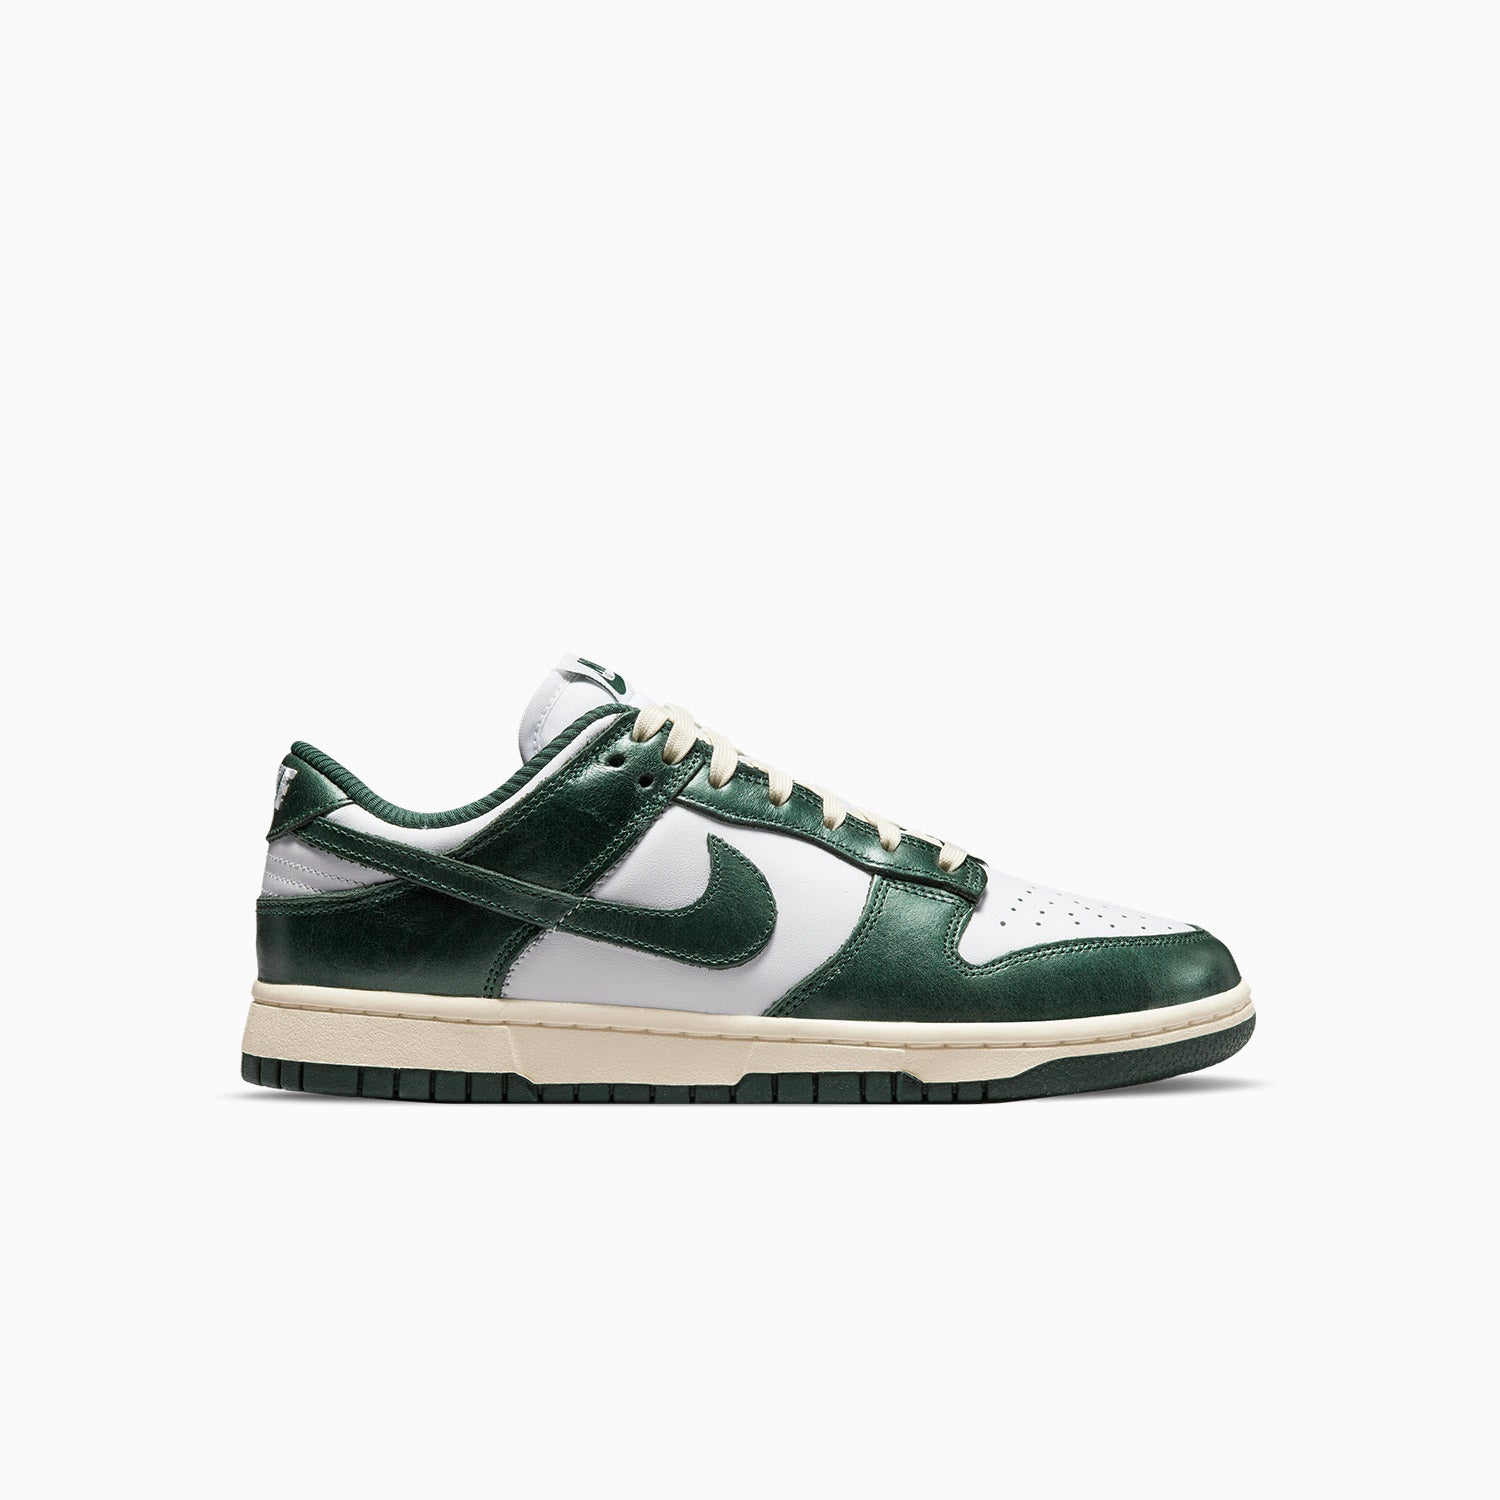 nike-womens-dunk-low-vintage-green-shoes-dq8580-100